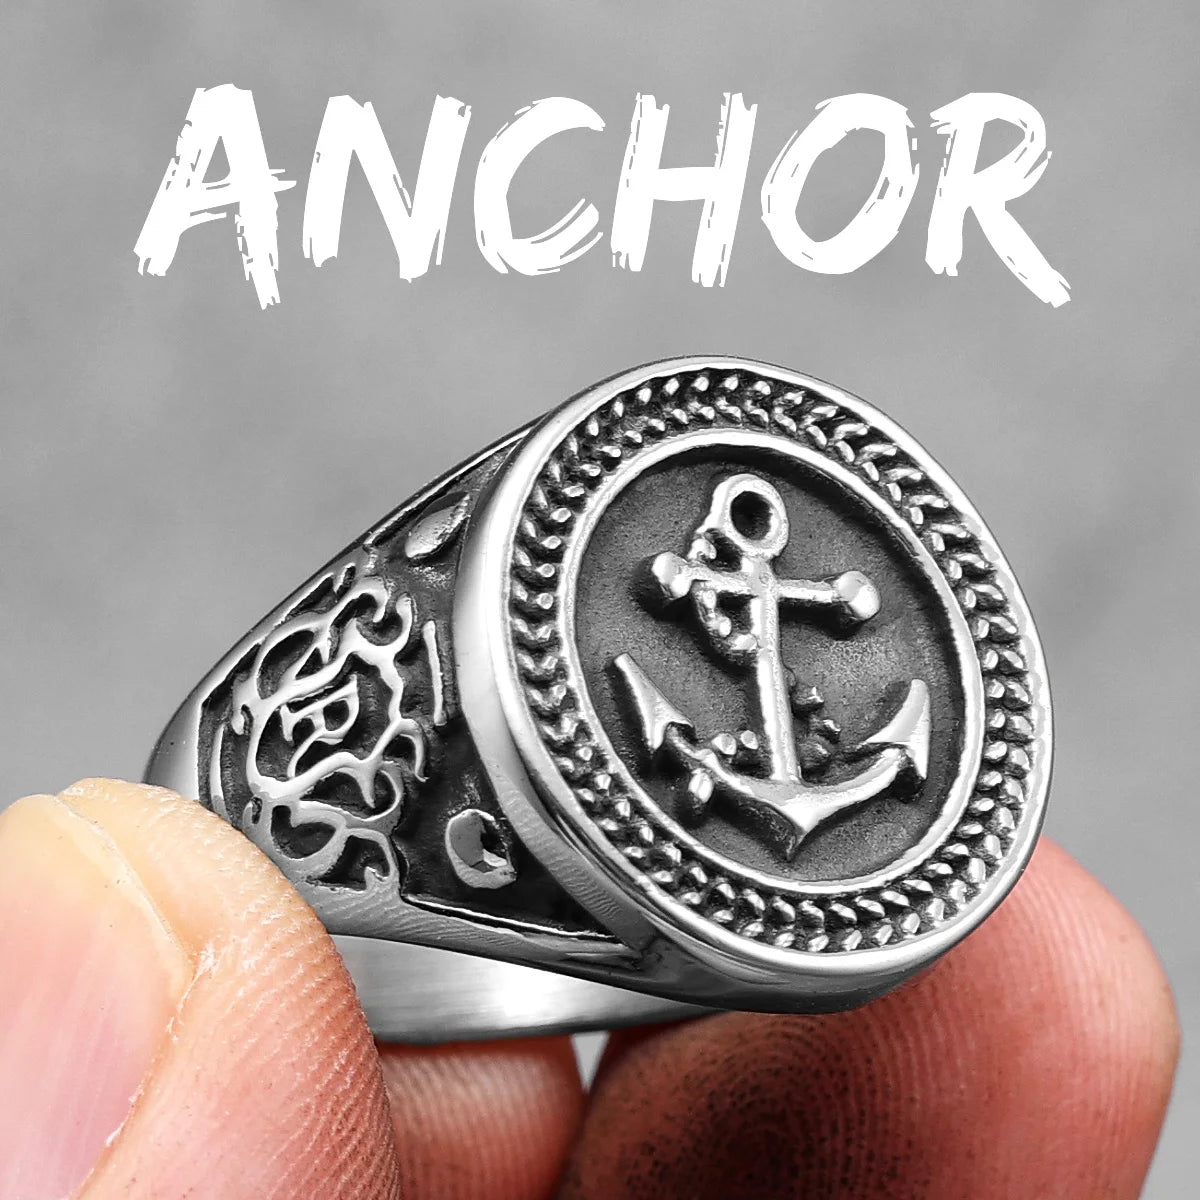 Anchor Lighthouse Ocean Sailor Ship Men Rings Stainless Steel Women Jewelry Vintage Punk Rock Fashion Accessories Gift R867-Anchor